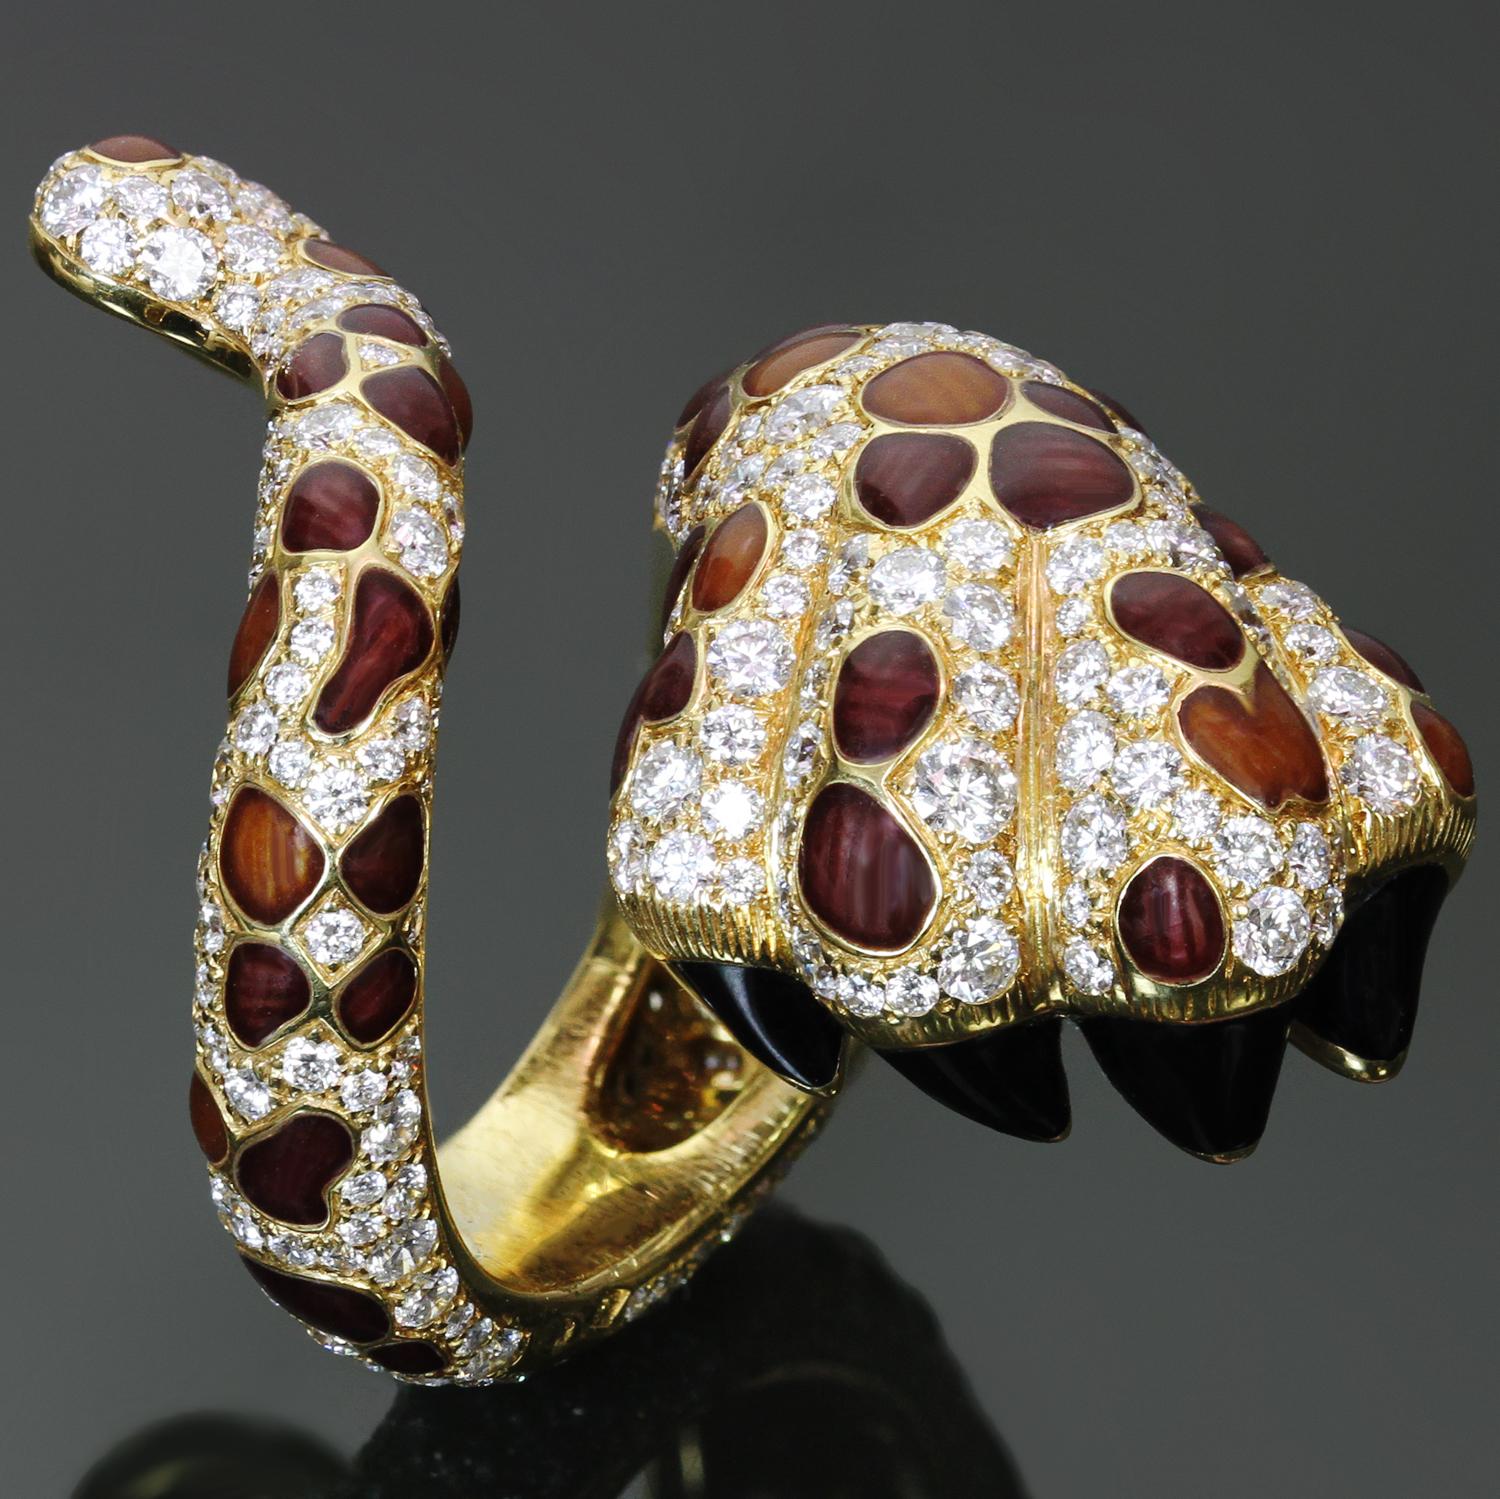 This magnificent authentic Christian Dior Mitzah collection ring features a chic leopard paw and tail design crafted in 18k yellow gold and accented with lacquer spots and black enamel claws and pave-set with brilliant-cut round diamonds. Made in